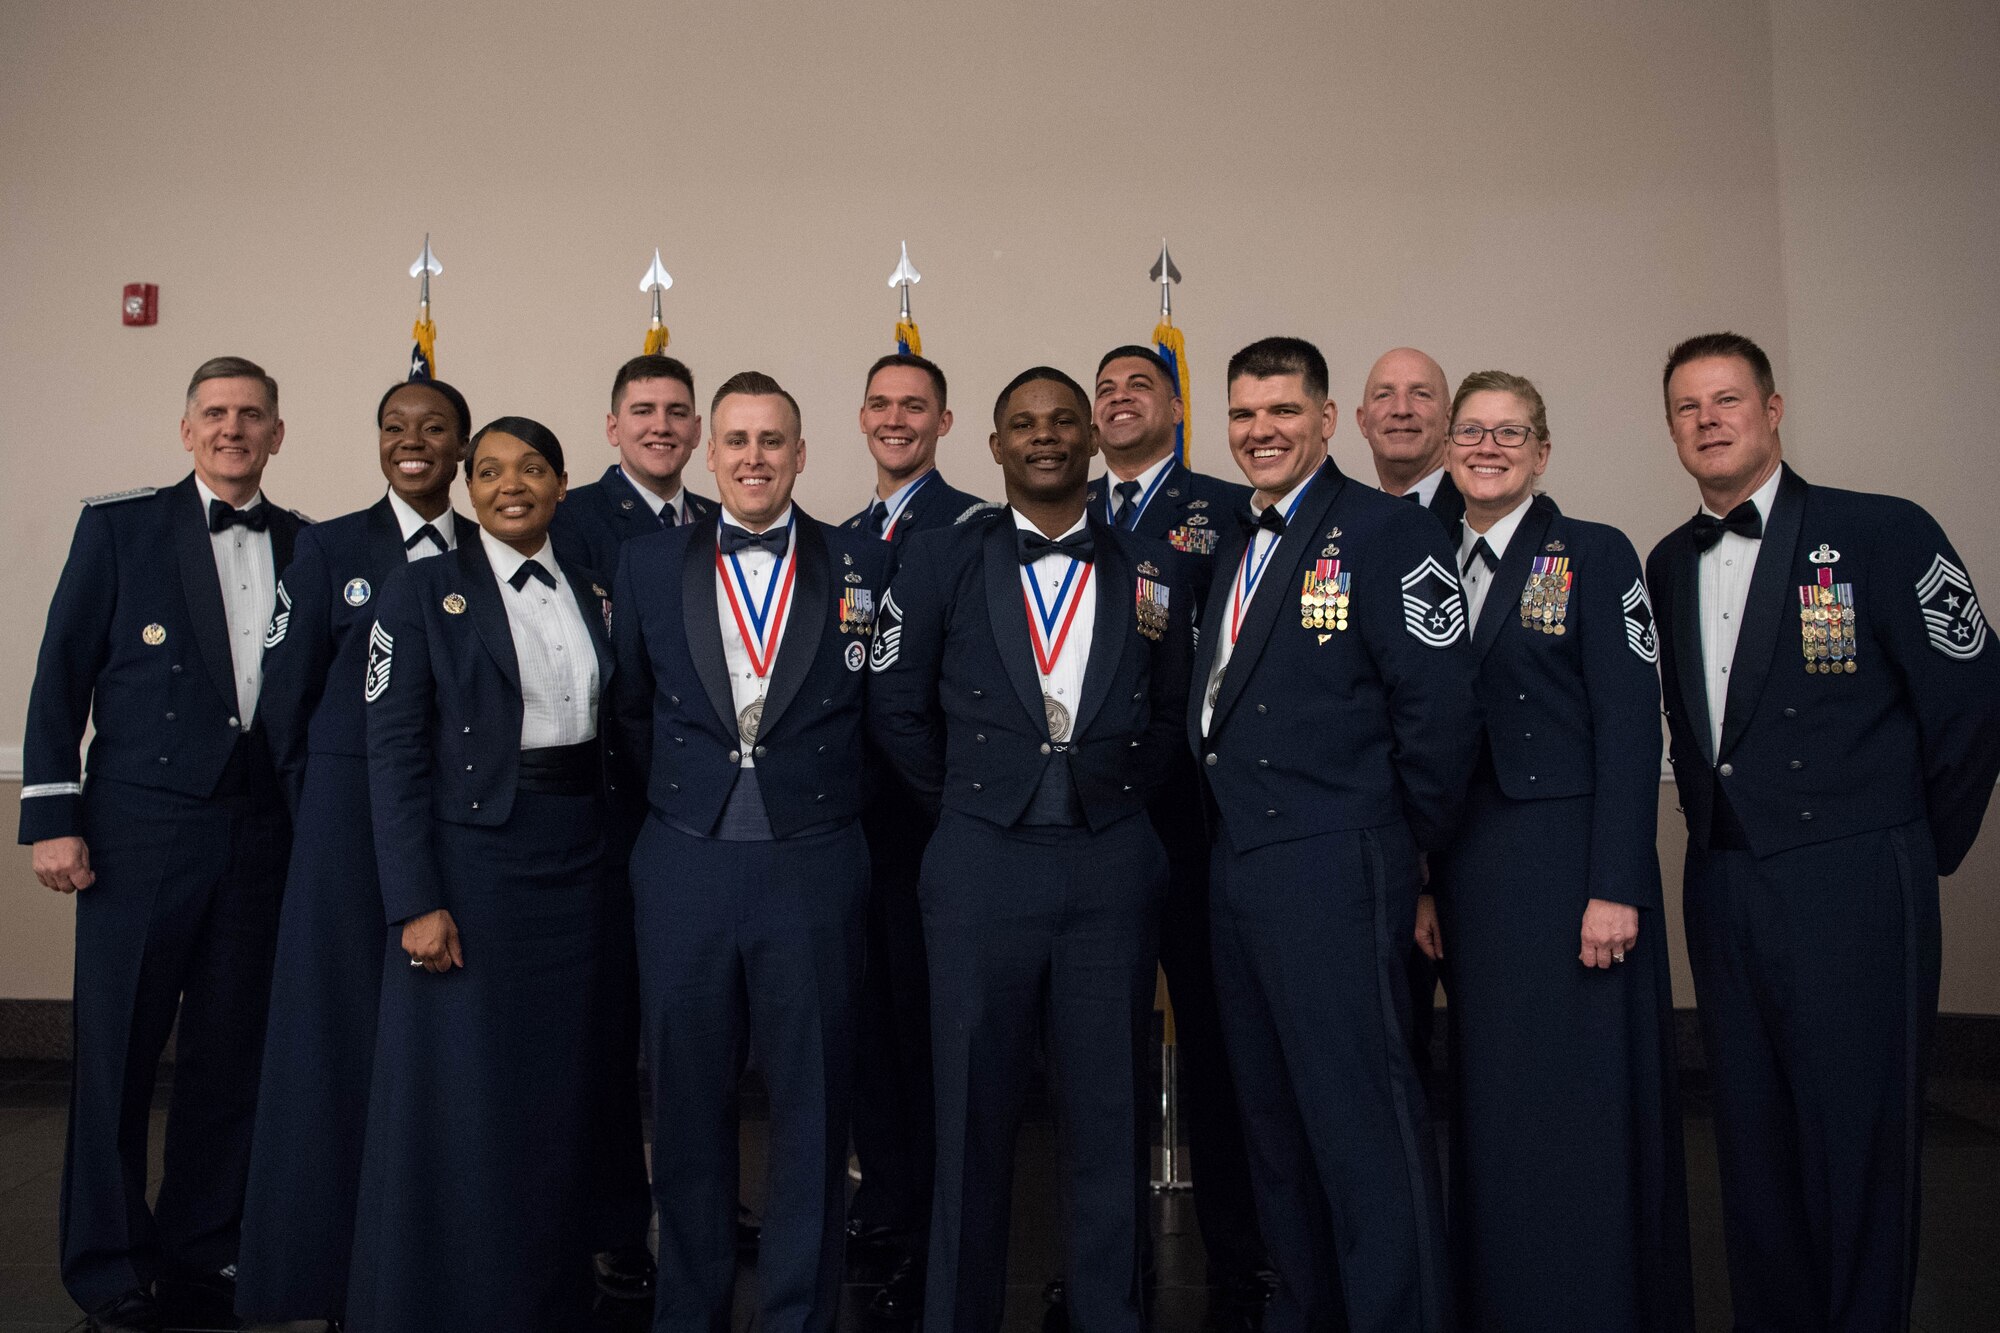 Air Force Global Strike Command’s six Outstanding Airmen of the Year award winners pose with other Airmen from AFGSC at the AFGSC Outstanding Airmen of the Year award ceremony April 15, 2019, at Barksdale Air Force Base, La. The ceremony was hosted in honor of six Airmen who were selected as the most outstanding Airmen throughout AFGSC. (U.S. Air Force photo by Airman Jacob B. Wrightsman)